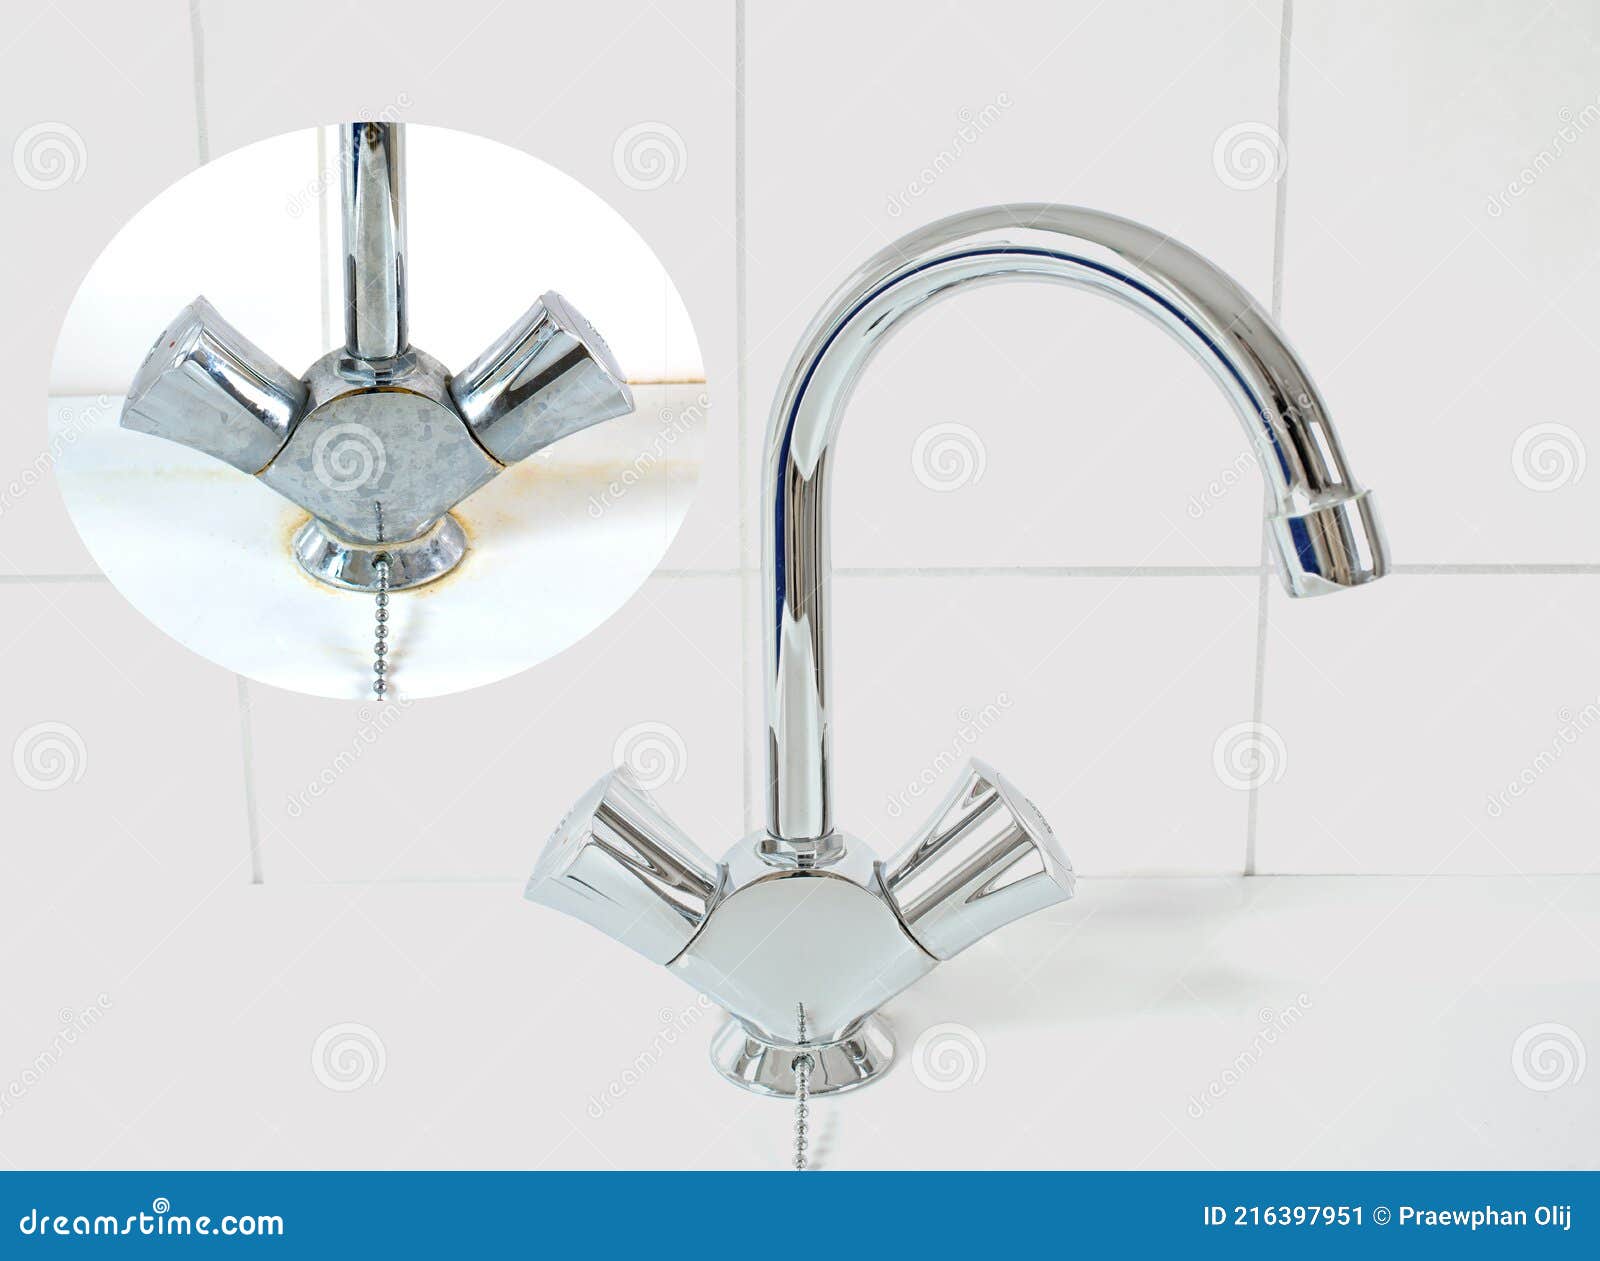 compare image before- after cleaning with special detergent of the dirty stainless faucet cover with dirty hard calcium water stai